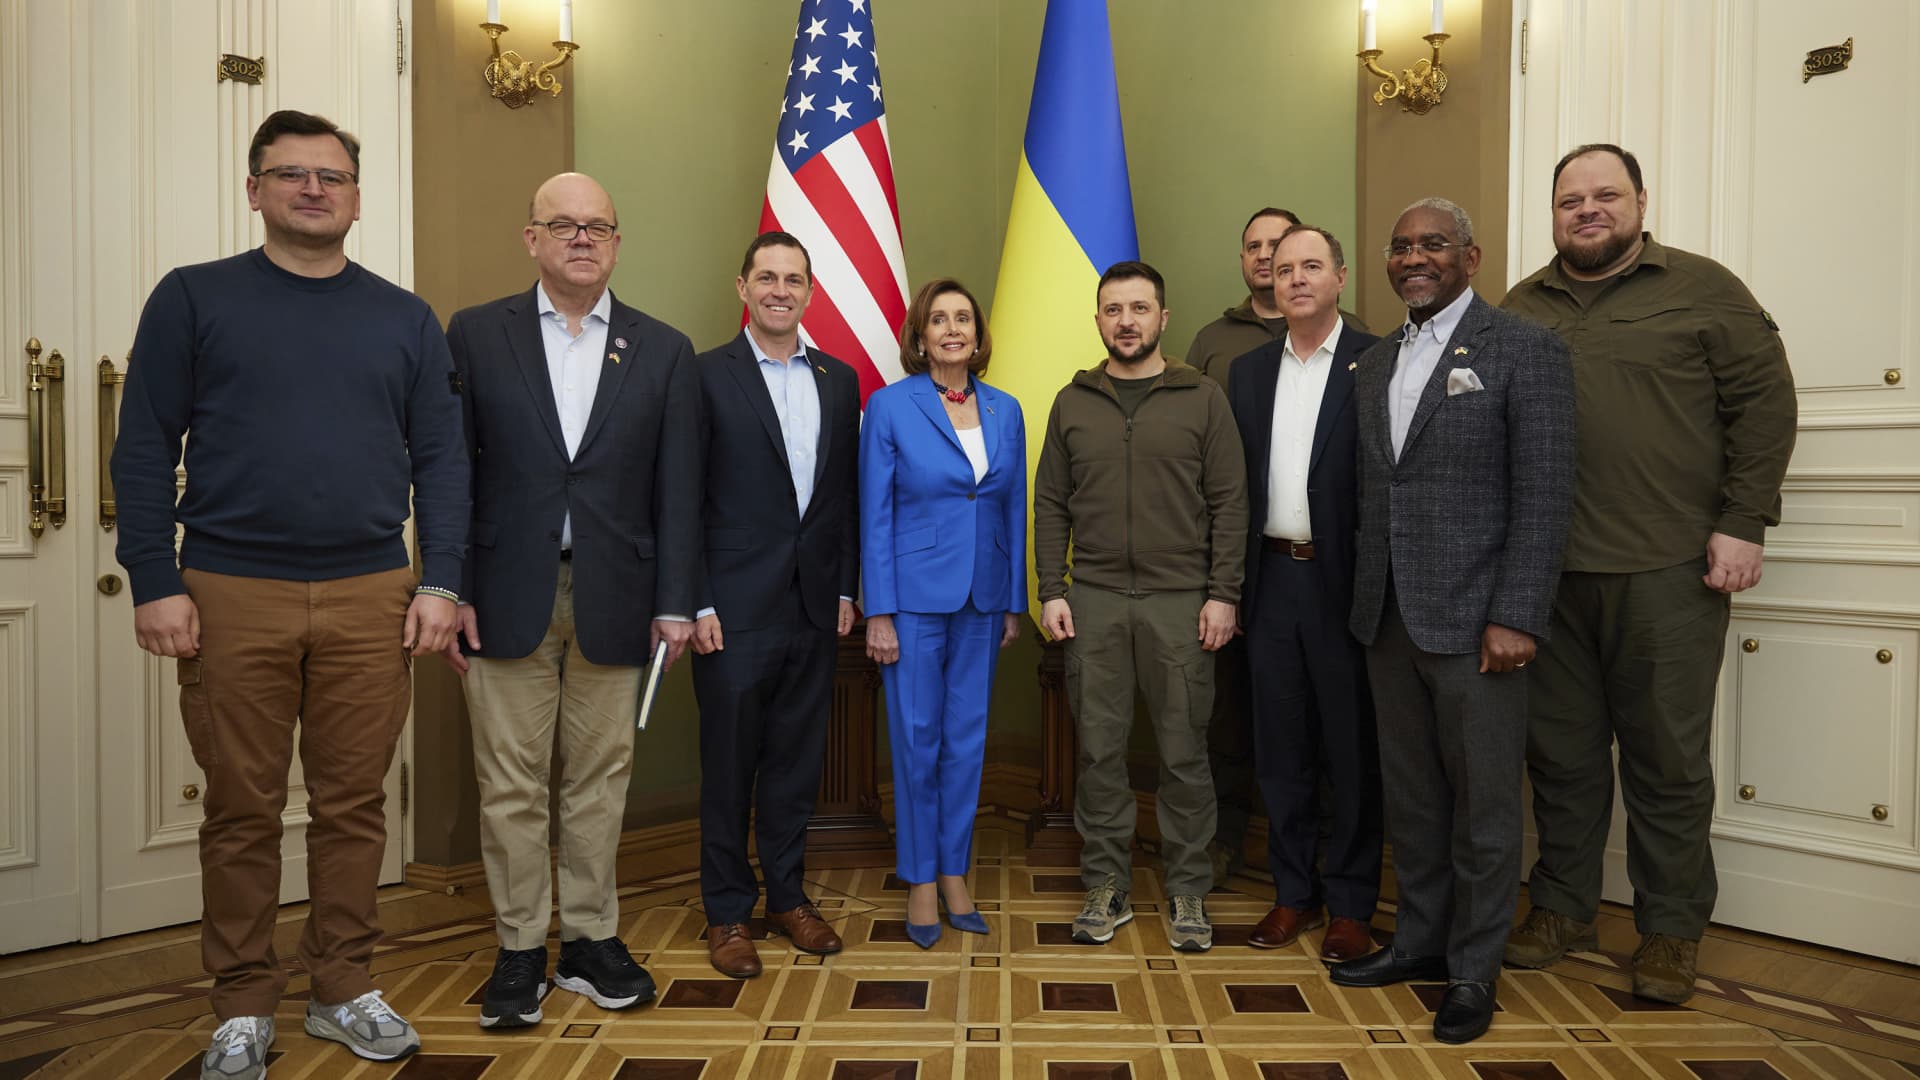 Nancy Pelosi leads surprise delegation to Kyiv and Poland, and vows U.S. support